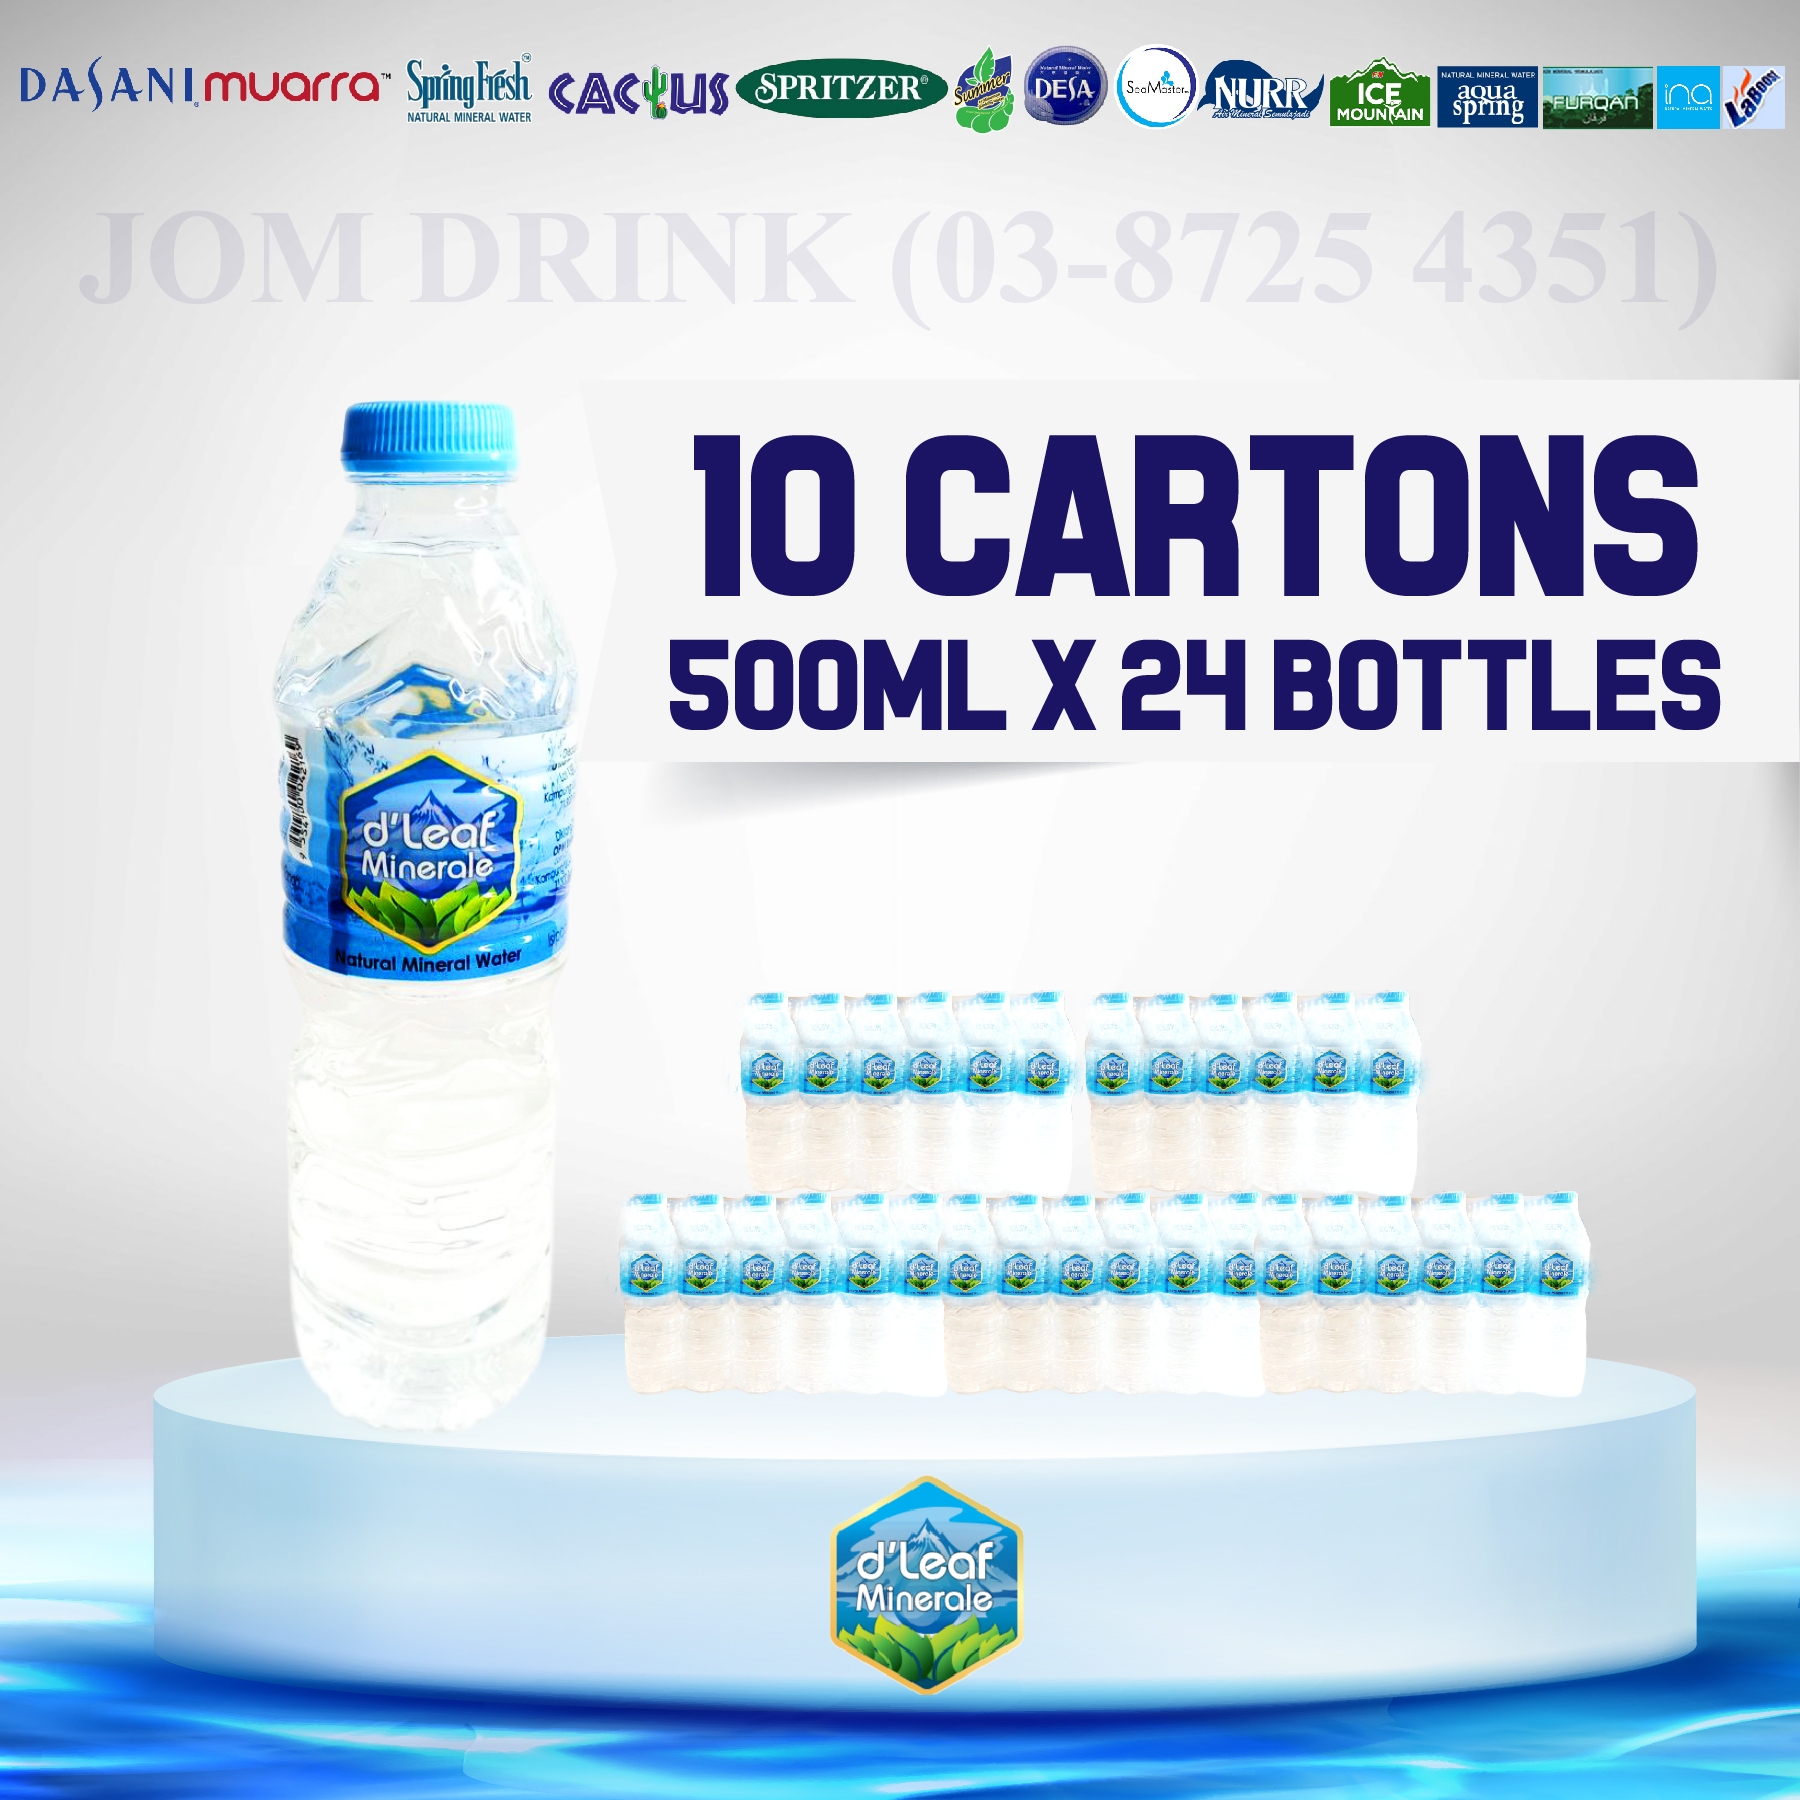 PACKAGES OF 10 BOXES : D’LEAF MINERALE MINERAL WATER 500ML